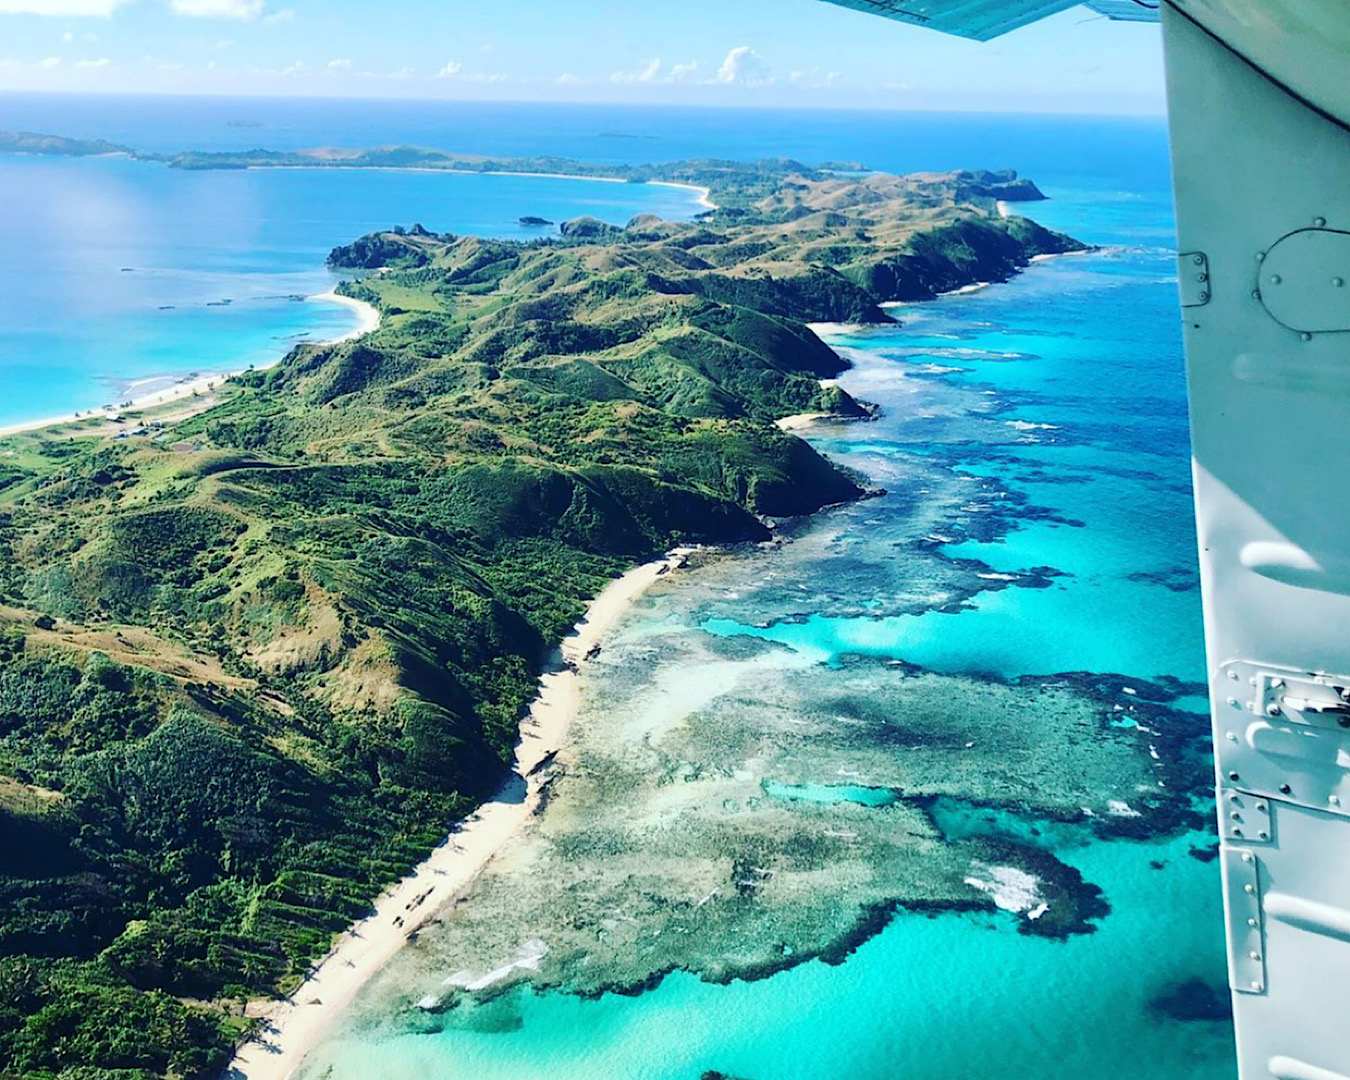 View of the Yasawa Islands and coral reef from a plane. 